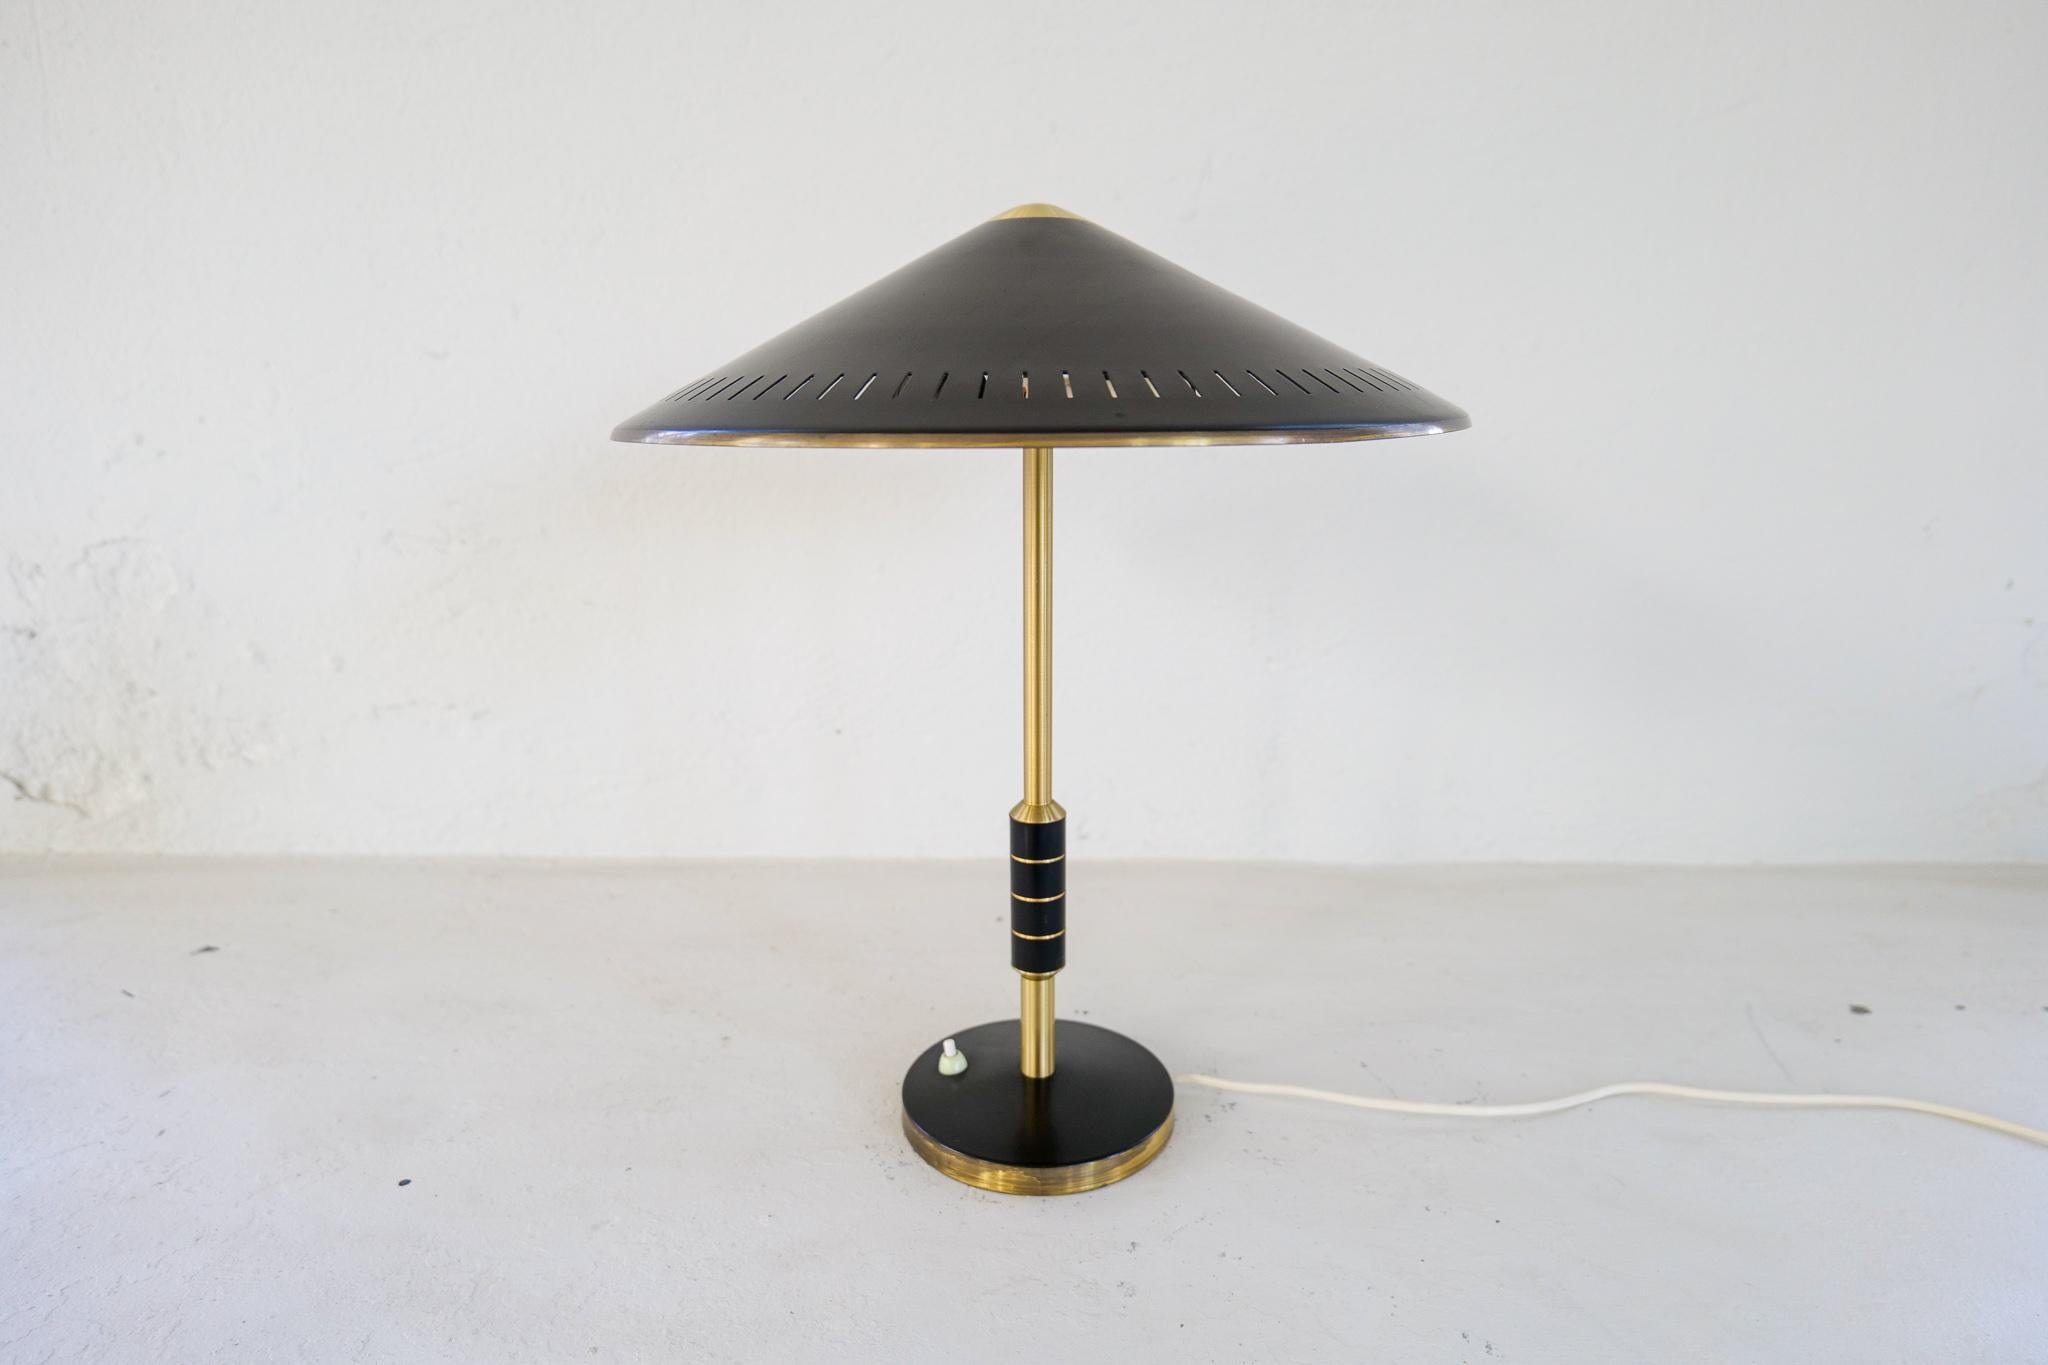 Mid-20th Century Midcentury Modern Table Lamp by Bent Karlby Produced by Lyfa in Denmark, 1956 For Sale